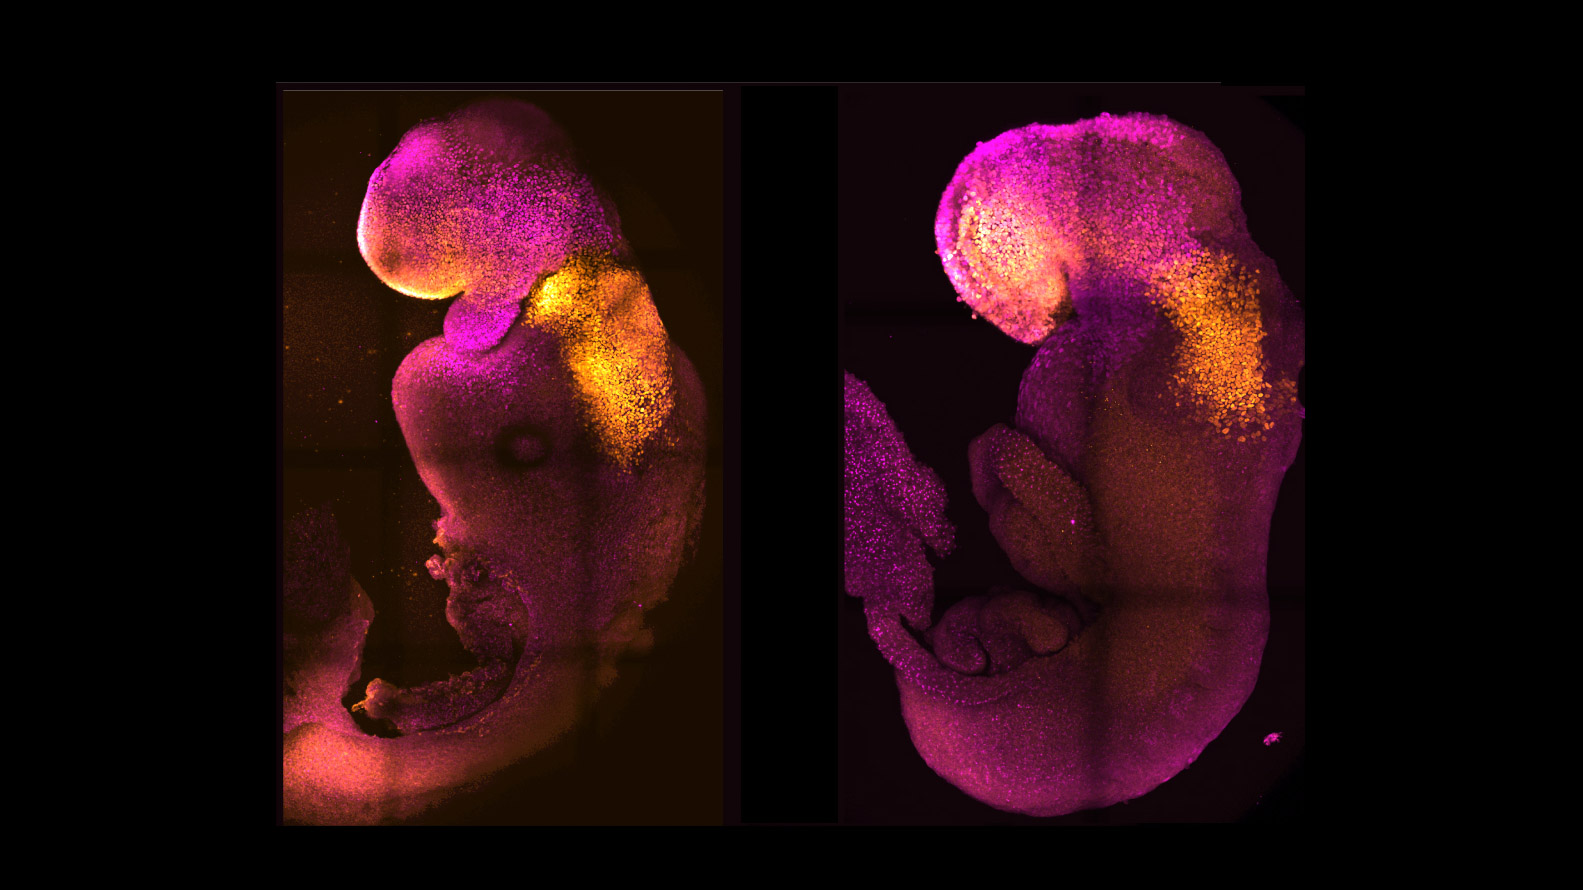 Natural and synthetic mouse embryos side by side